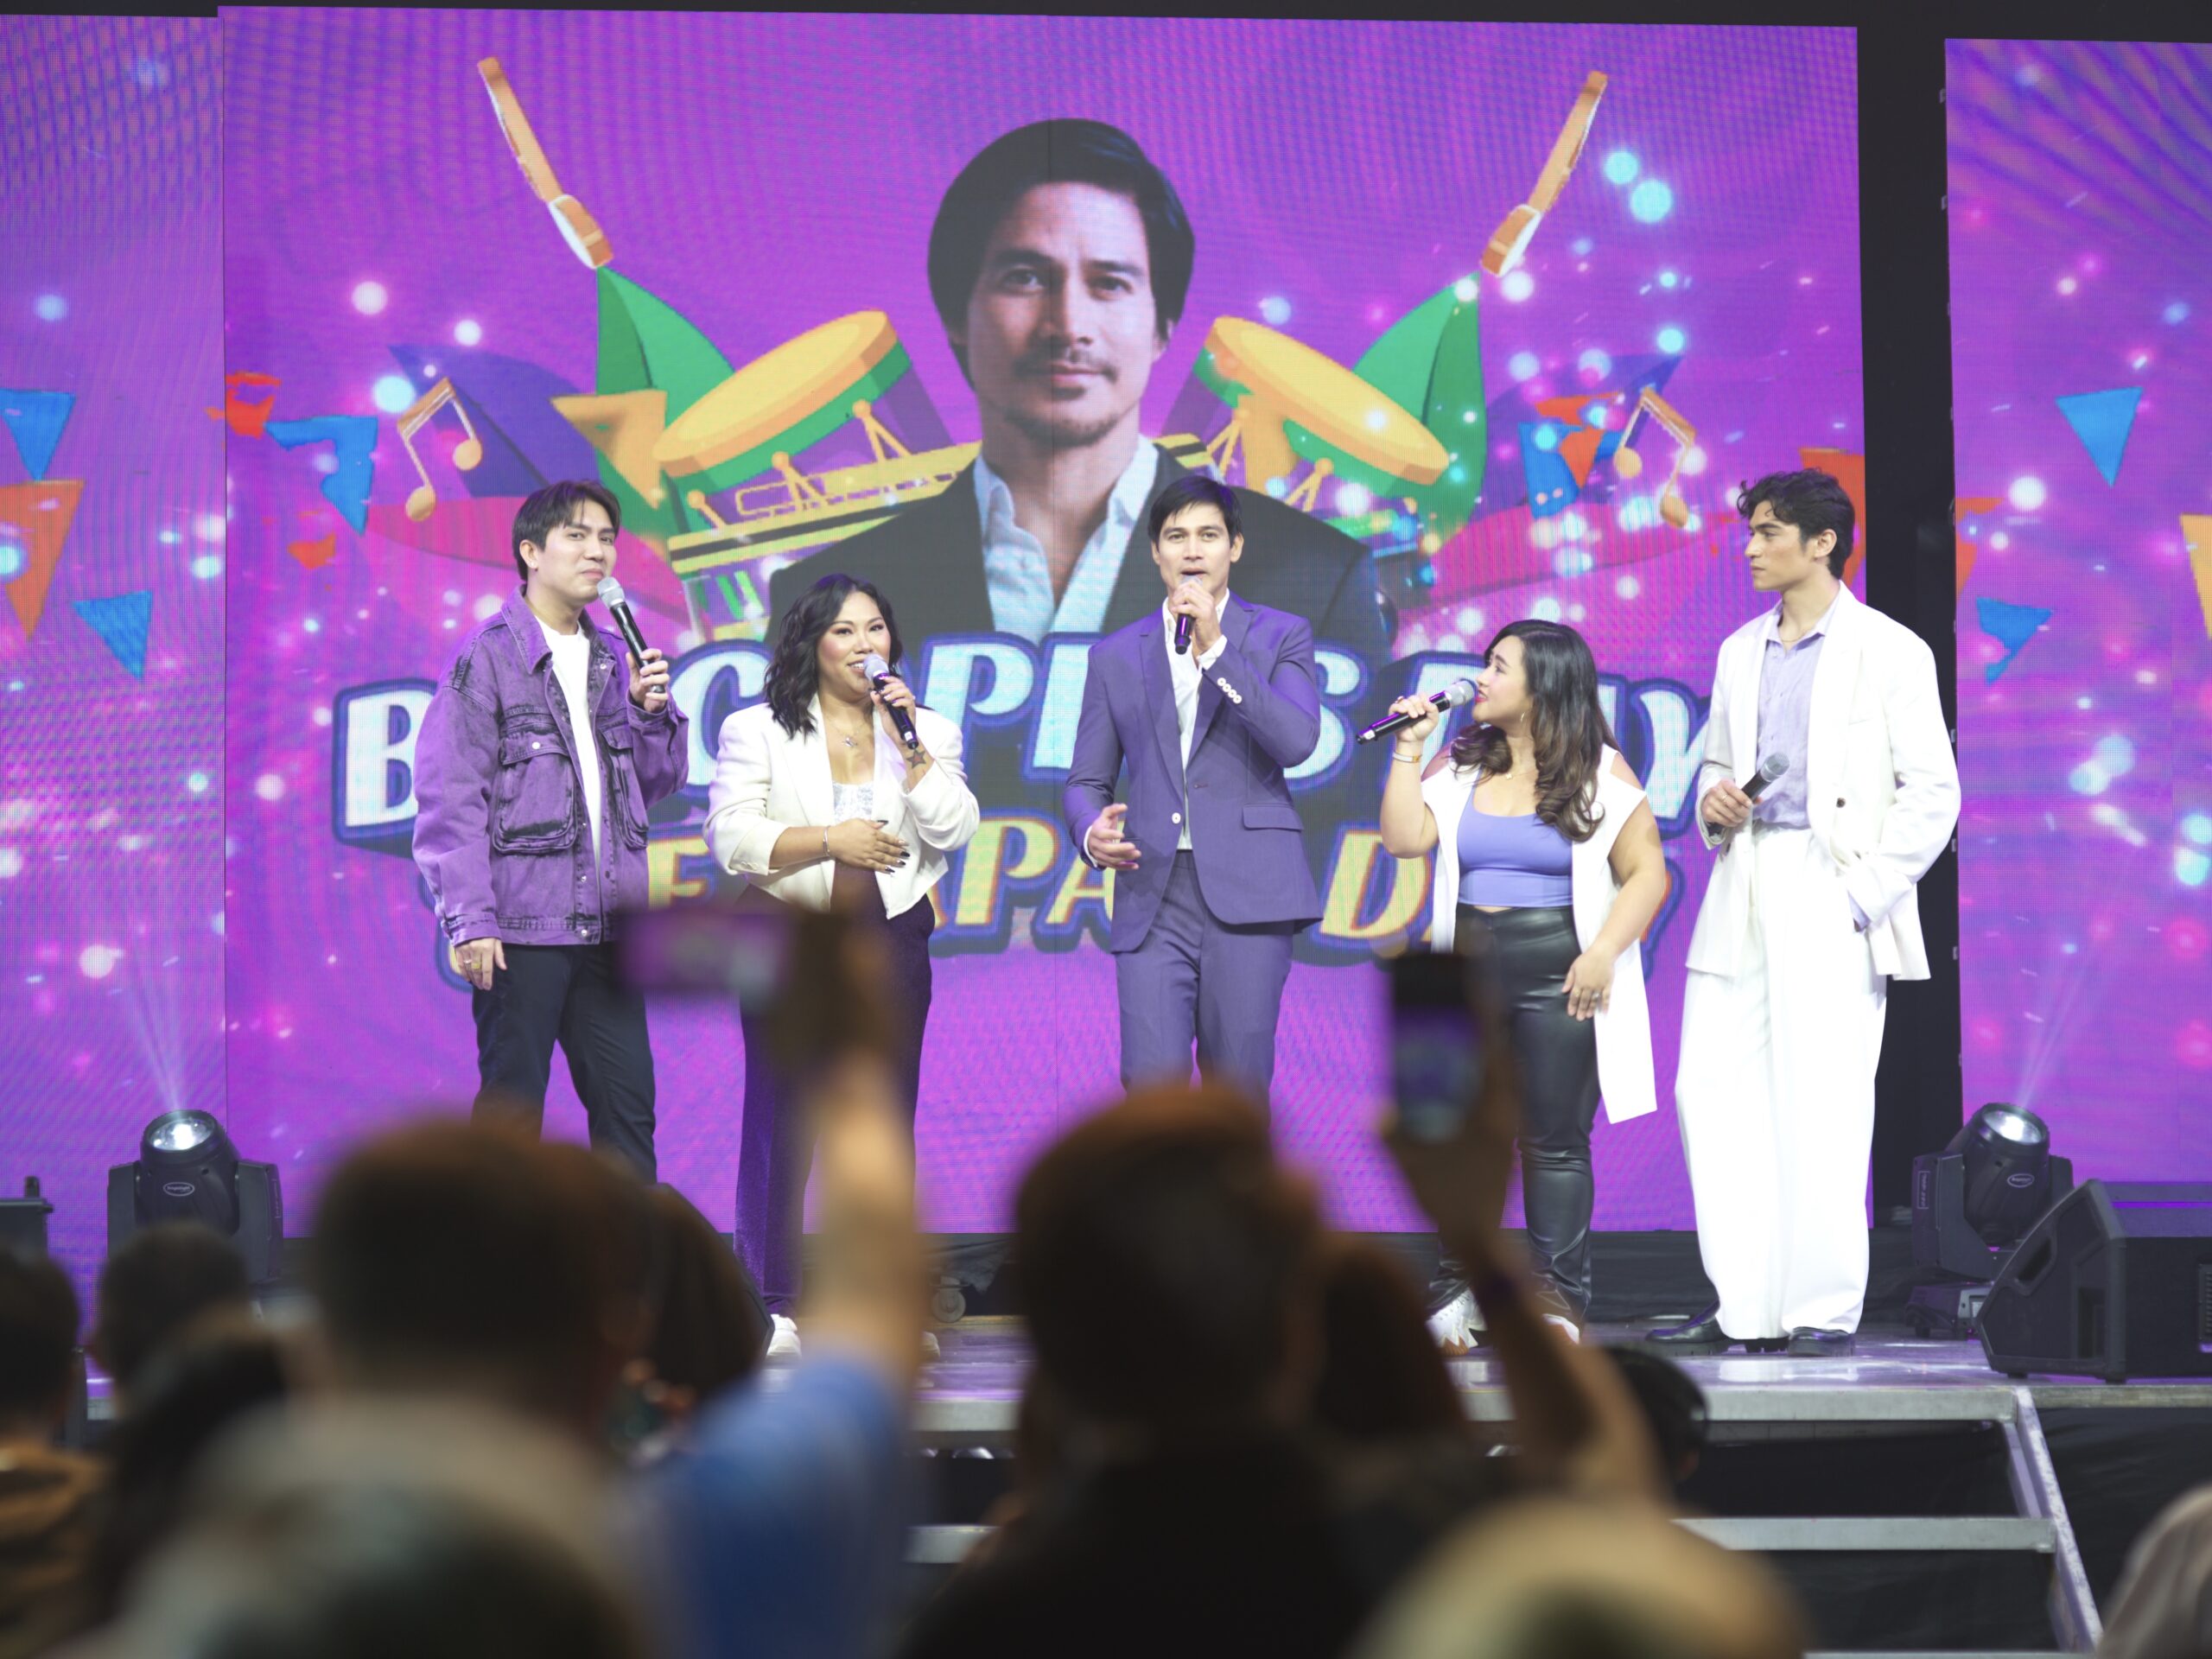 Bingoplus Introduces Piolo Pascual as Newest Endorser inthe Spectacular “Bingoplus Day: The Papa P Day!”